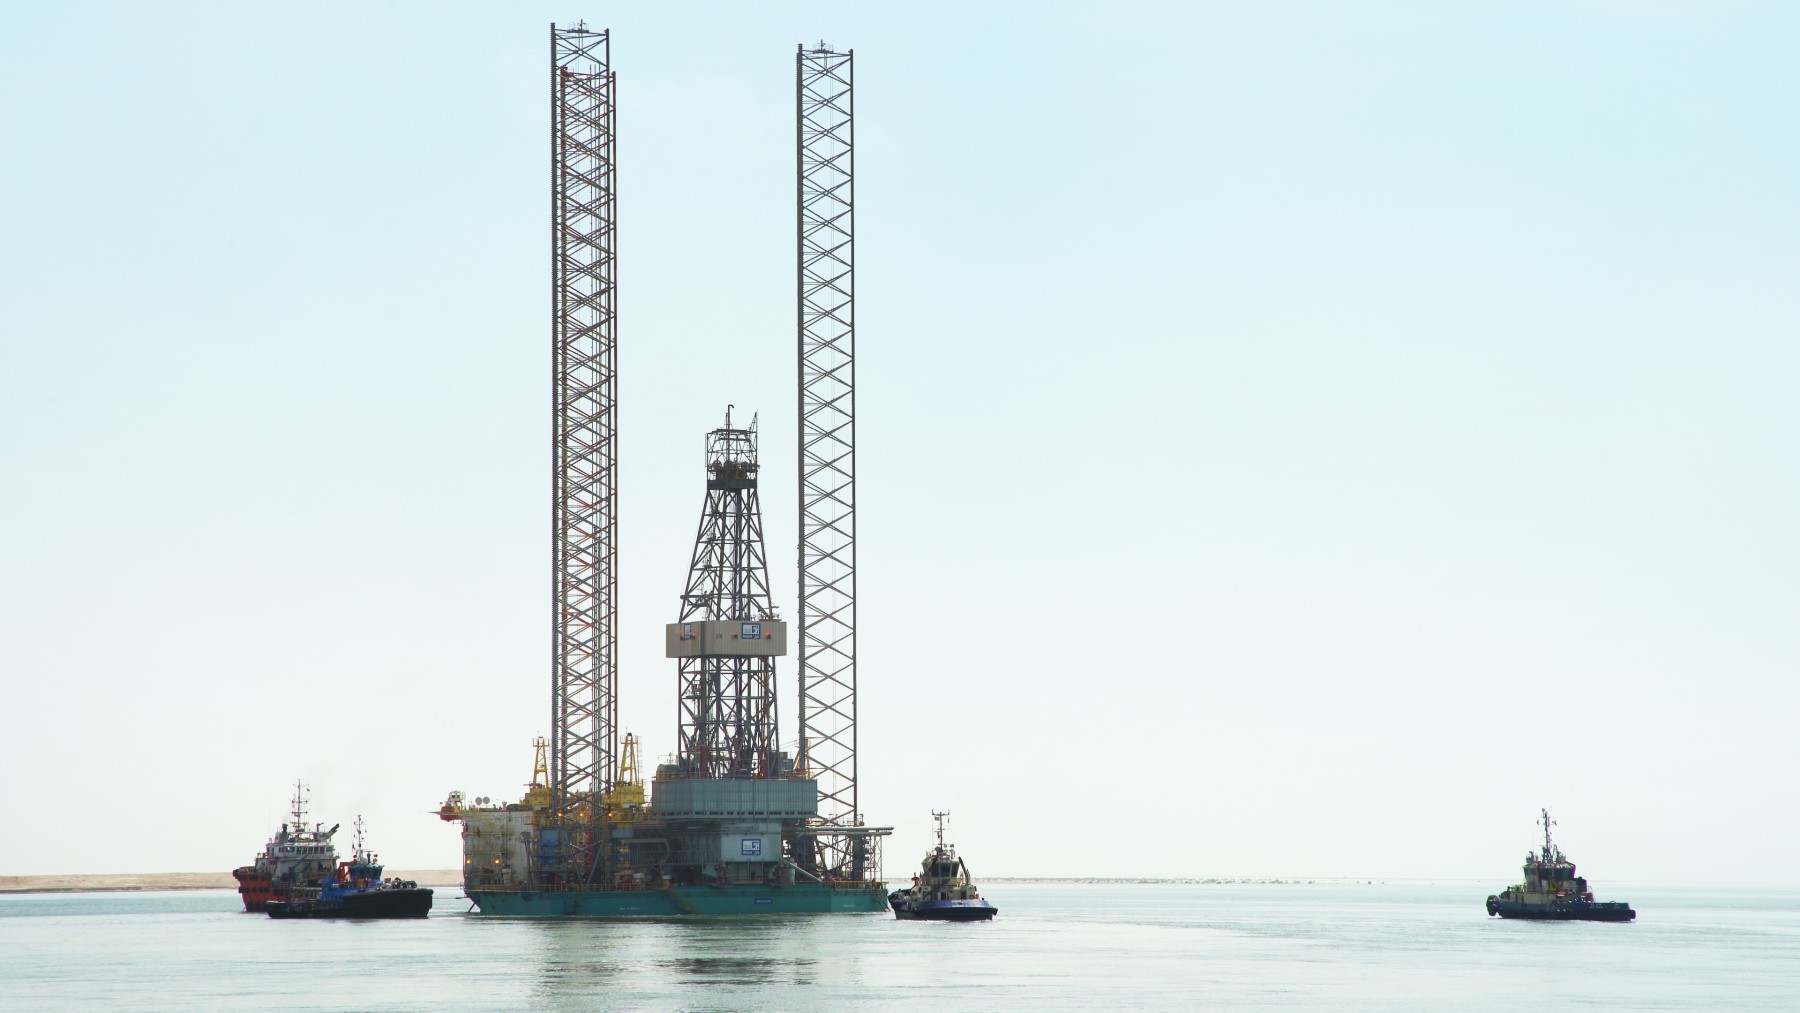 Two new rigs to join ‘one of the largest operating jack-up fleets in the world’